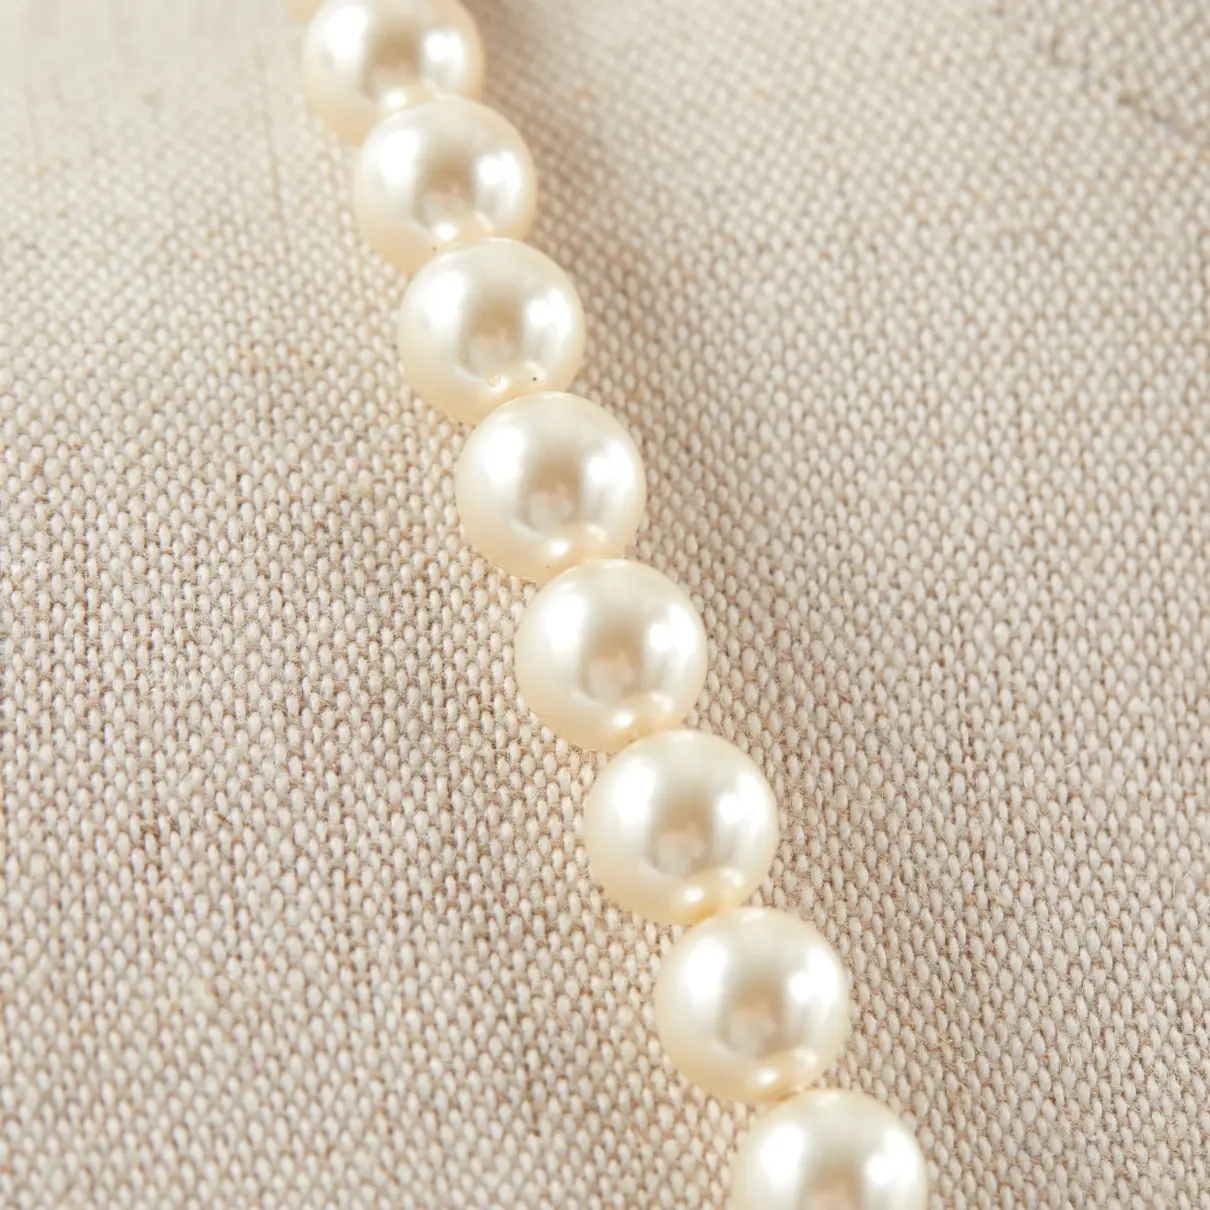 Buy Chanel Pearl necklace online